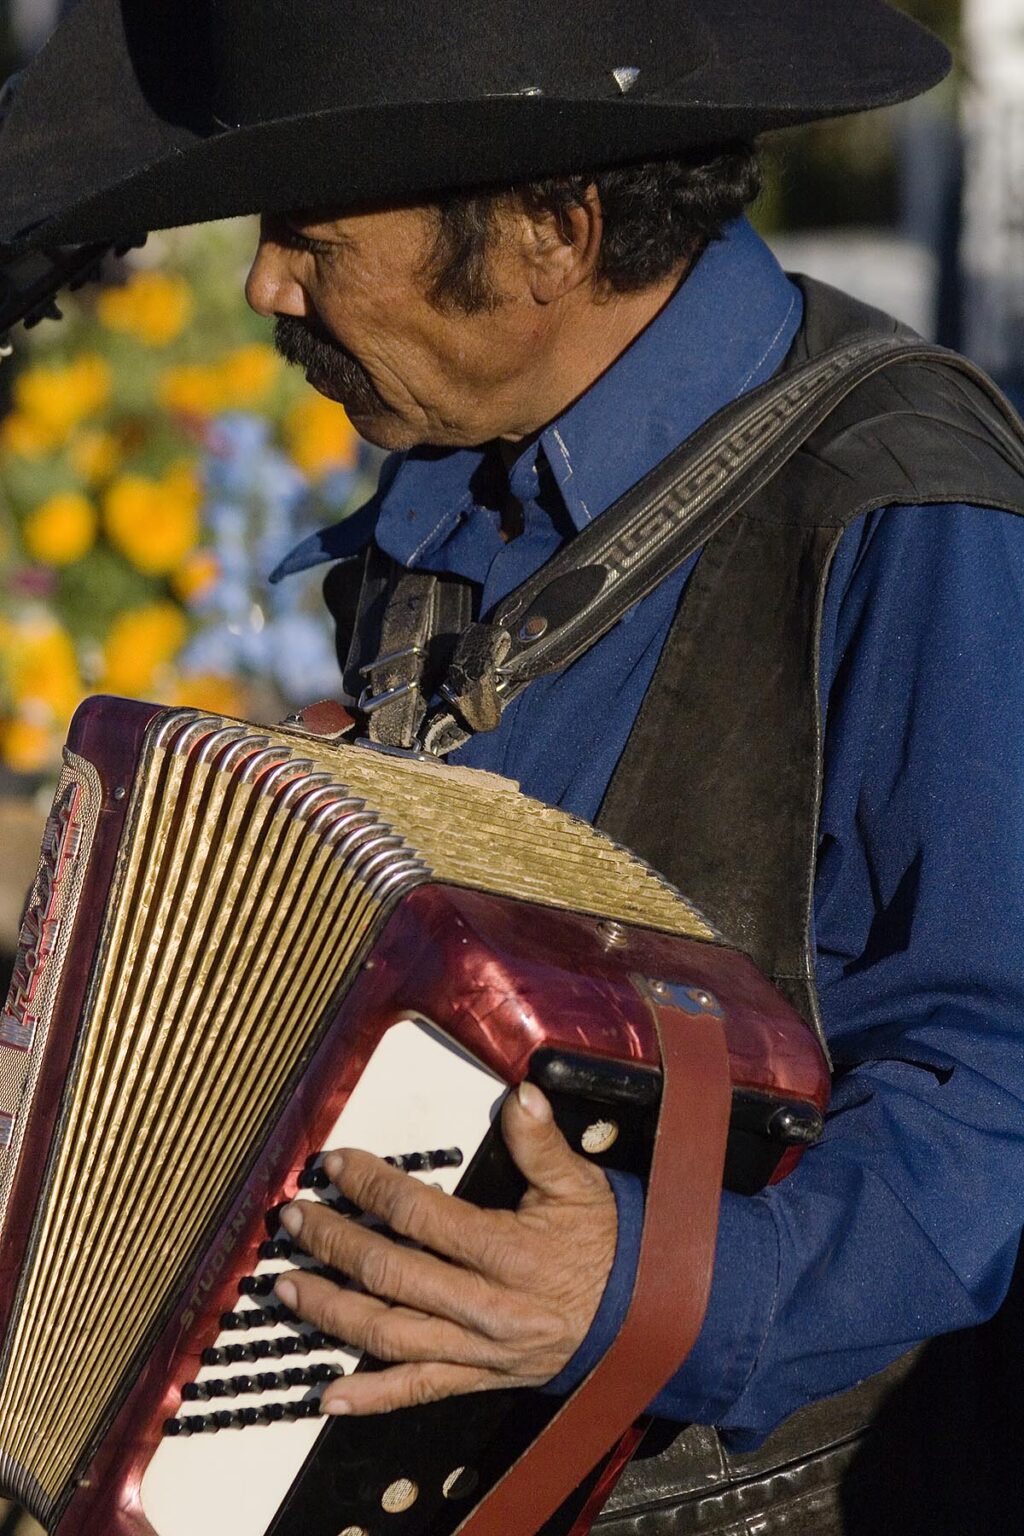 A song is played on an ACCORDION during the DEAD OF THE DEAD - SAN MIGUEL DE ALLENDE, MEXICO